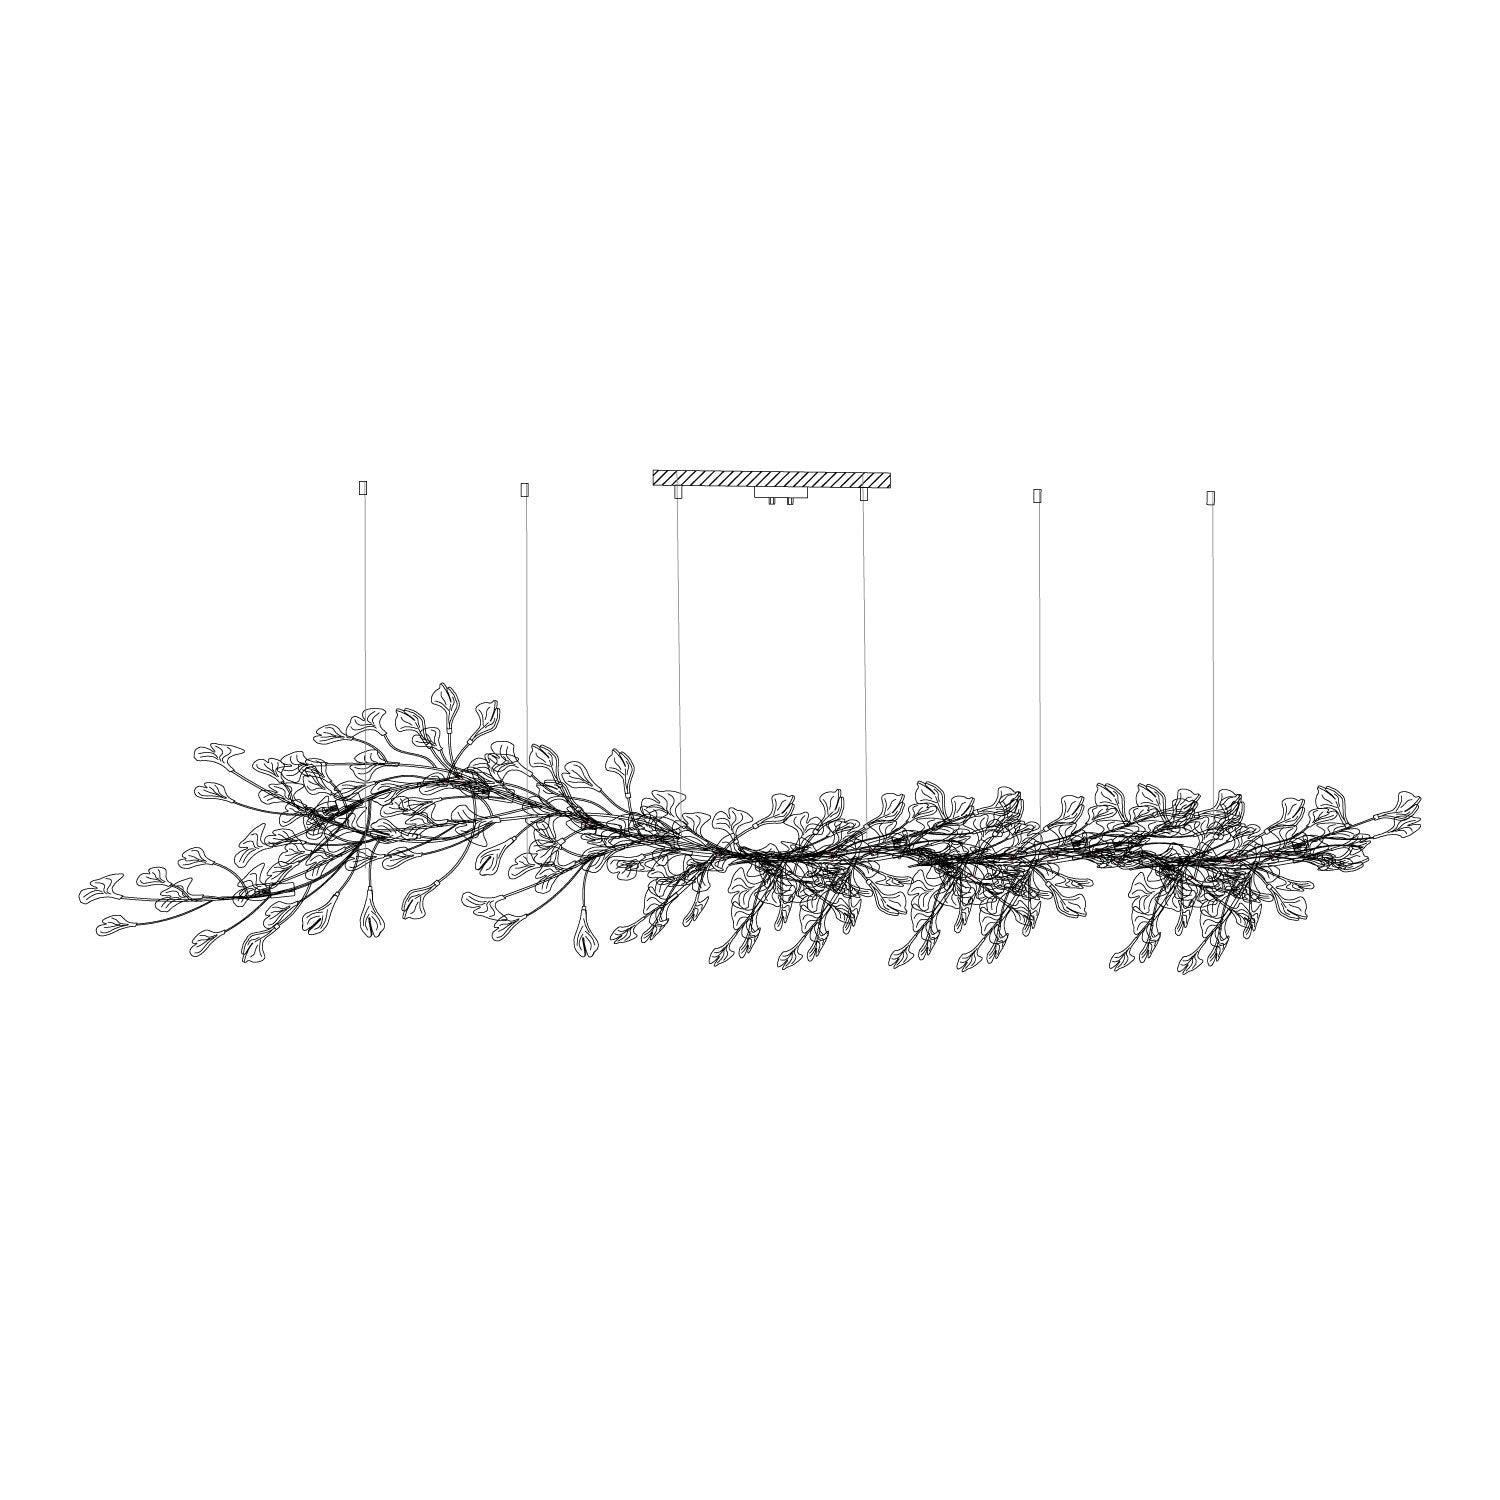 Gingko Chandelier in White with White Lamp Body and Leaf Color, Dimensions: Length 118.1 inches x Height 29.5 inches (300cm x 75cm).